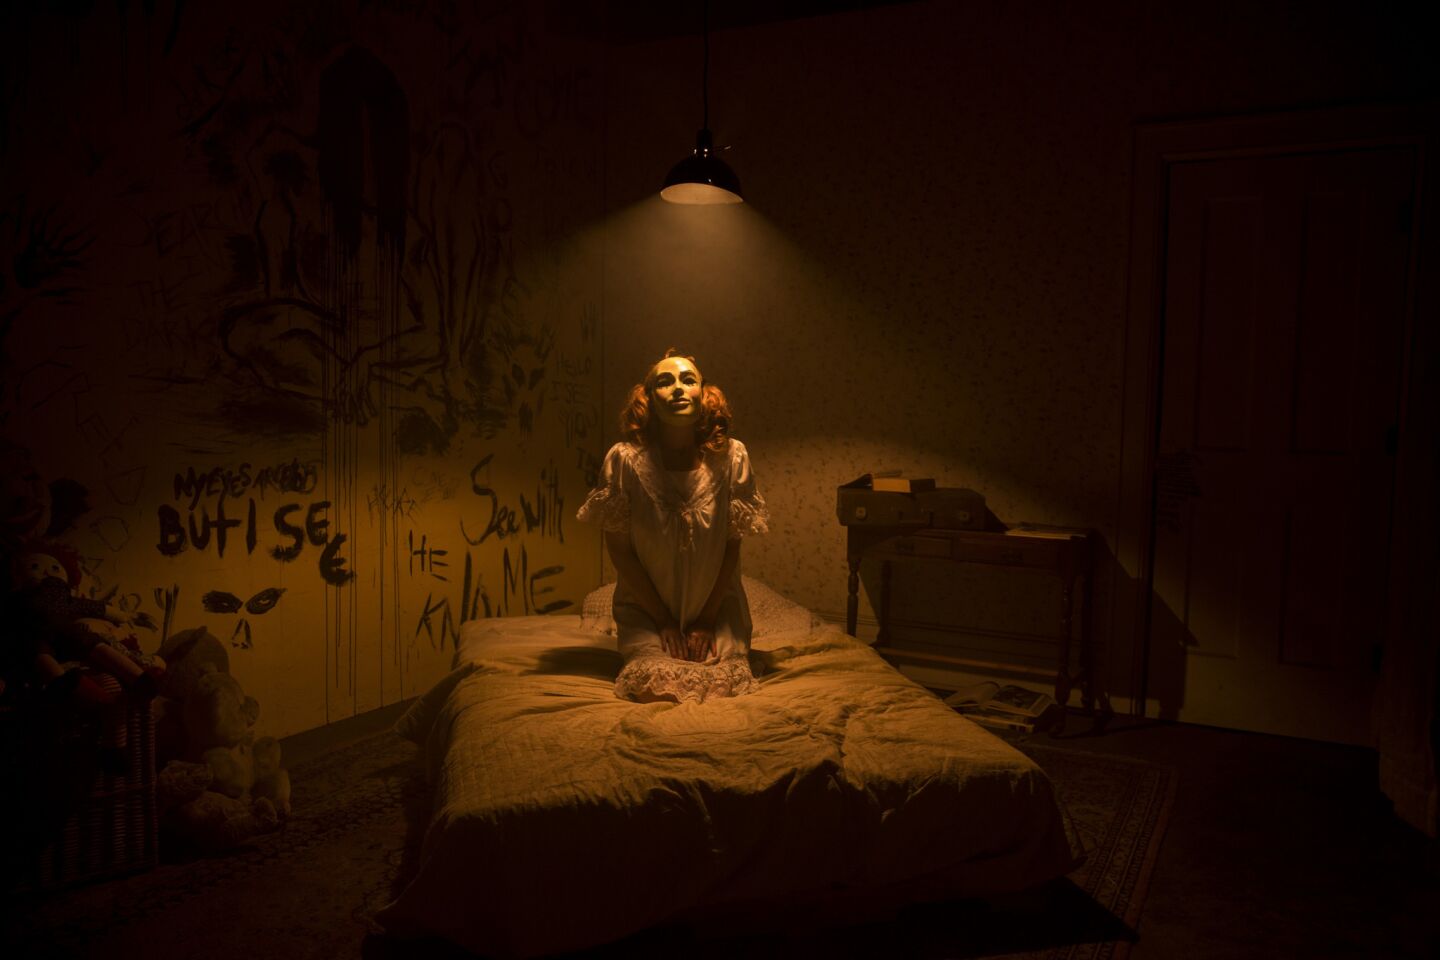 Actress Misha Reeves occupies one of several themed rooms inside CreepLA, a haunted house experience set up in a warehouse in the Glassell Park neighborhood.